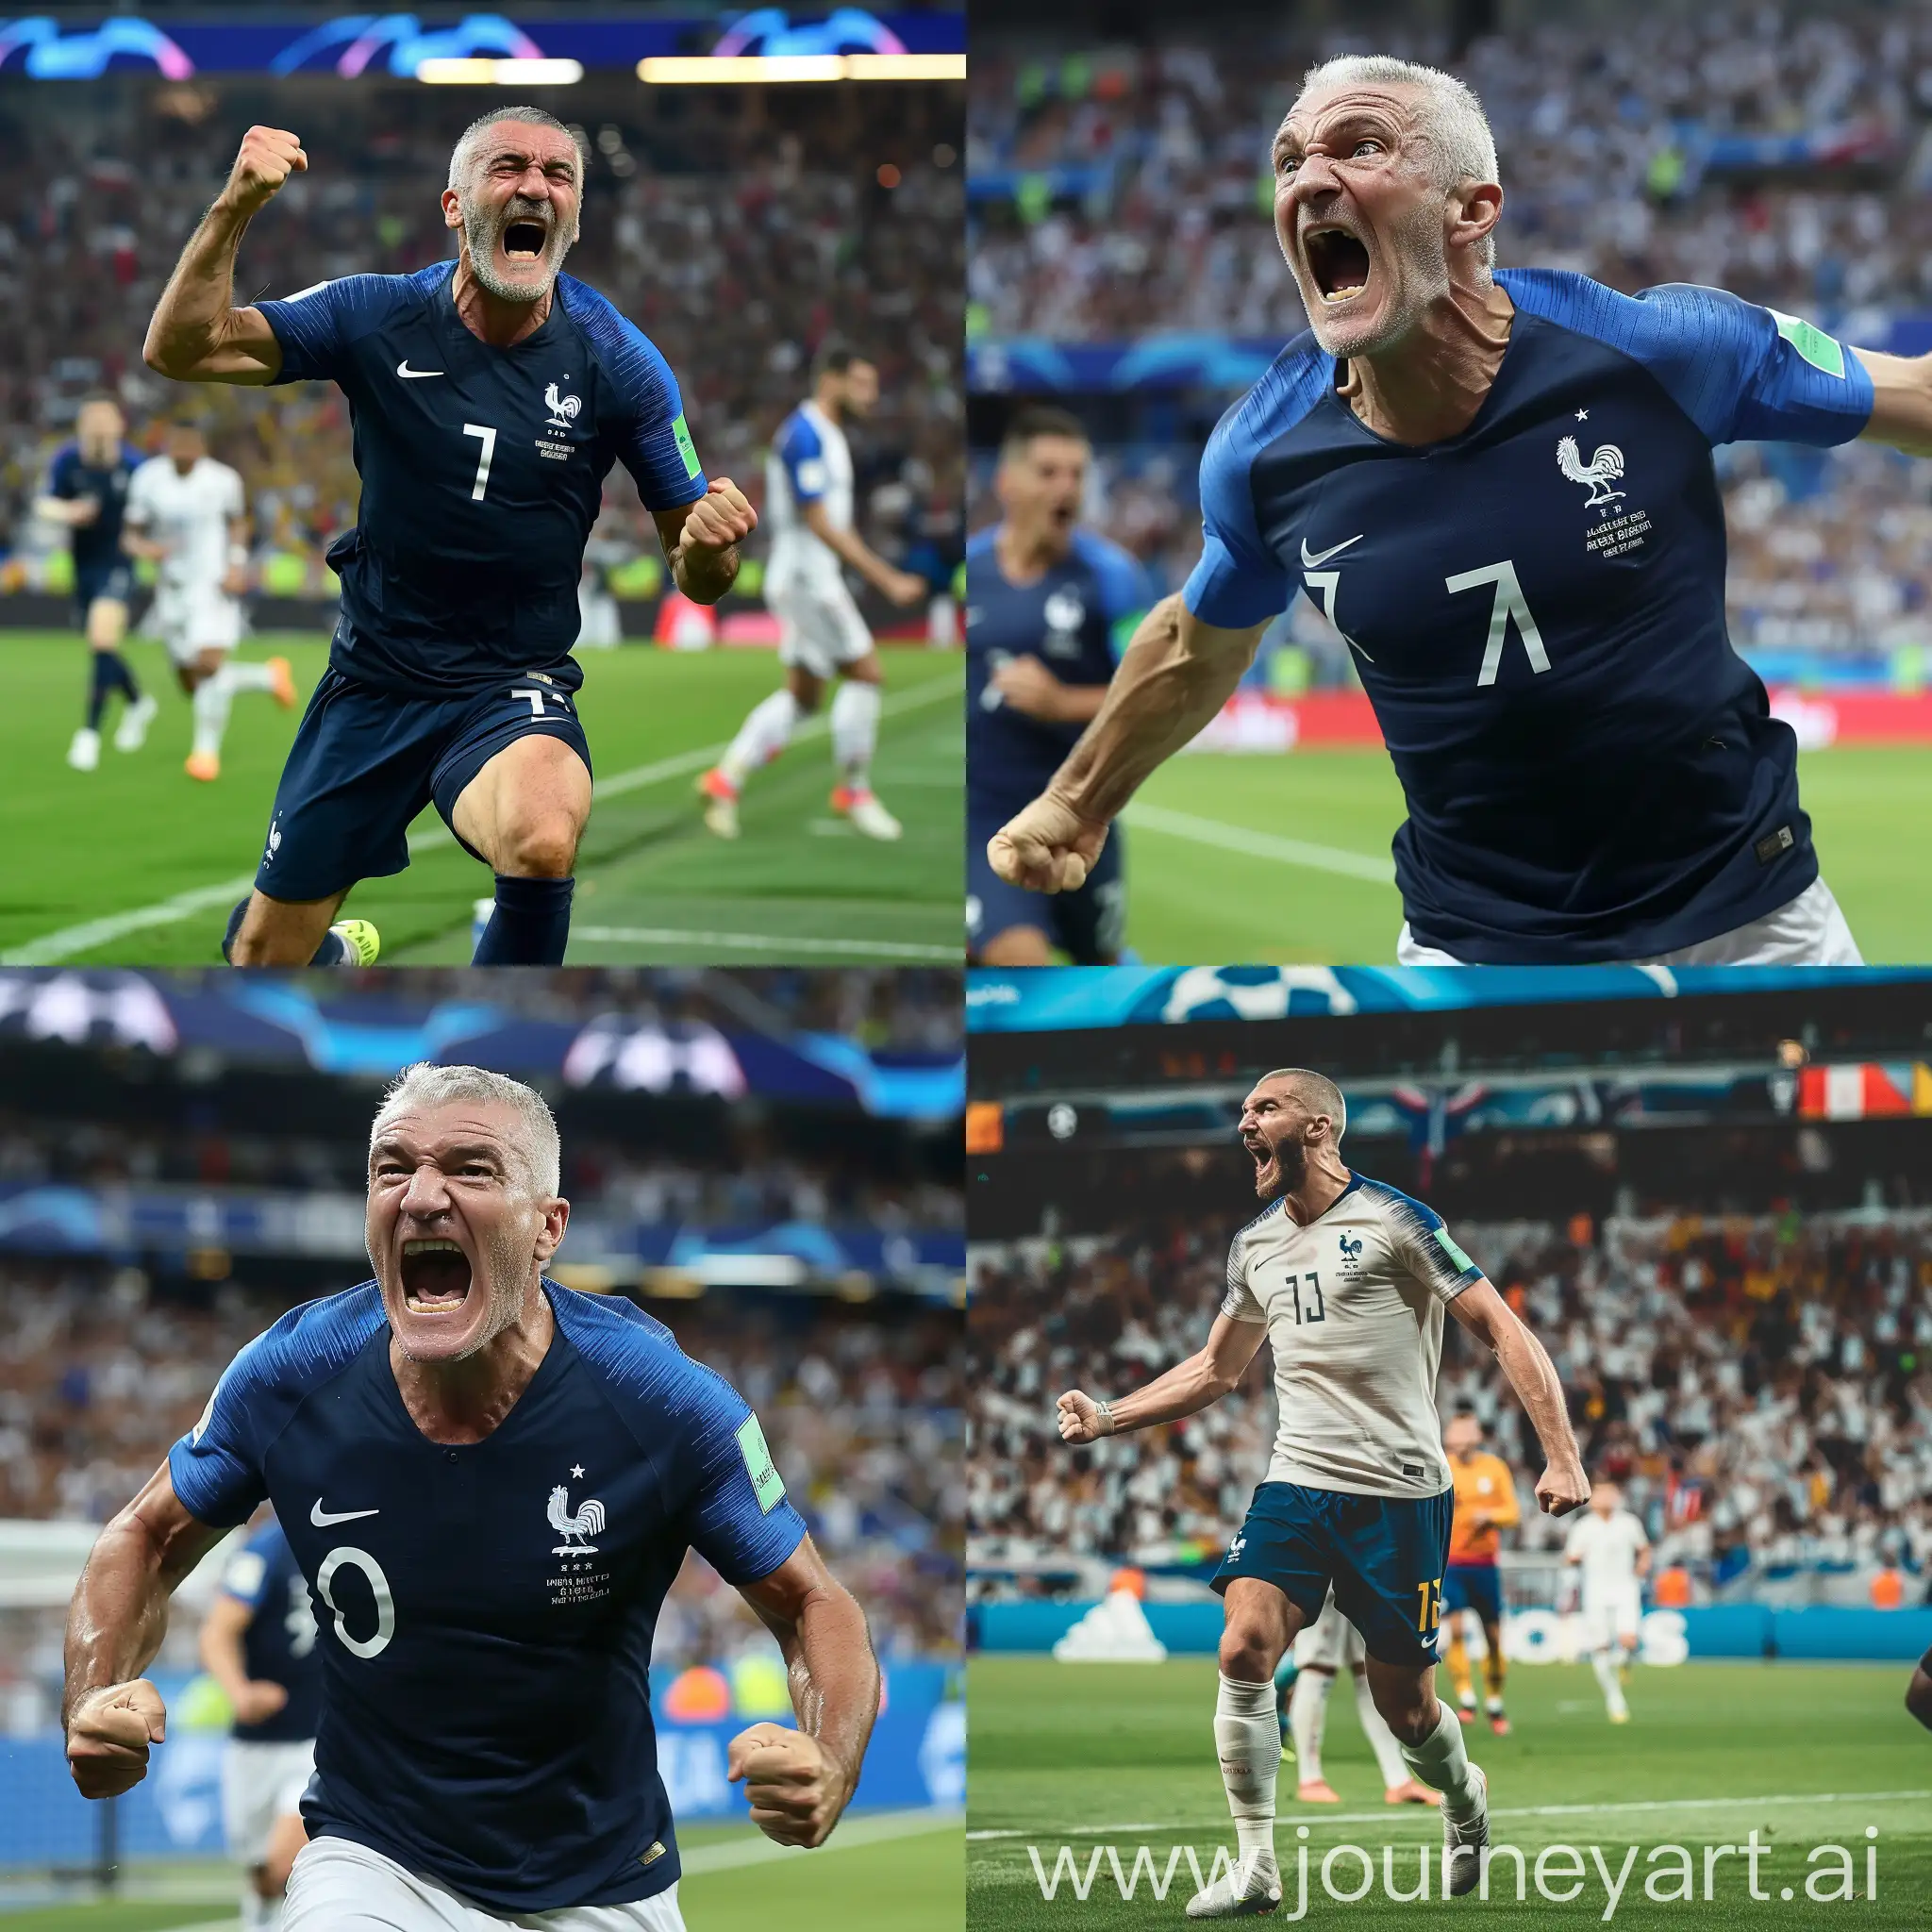 didier deschamps cheering and screaming as benzema is about to score a goal